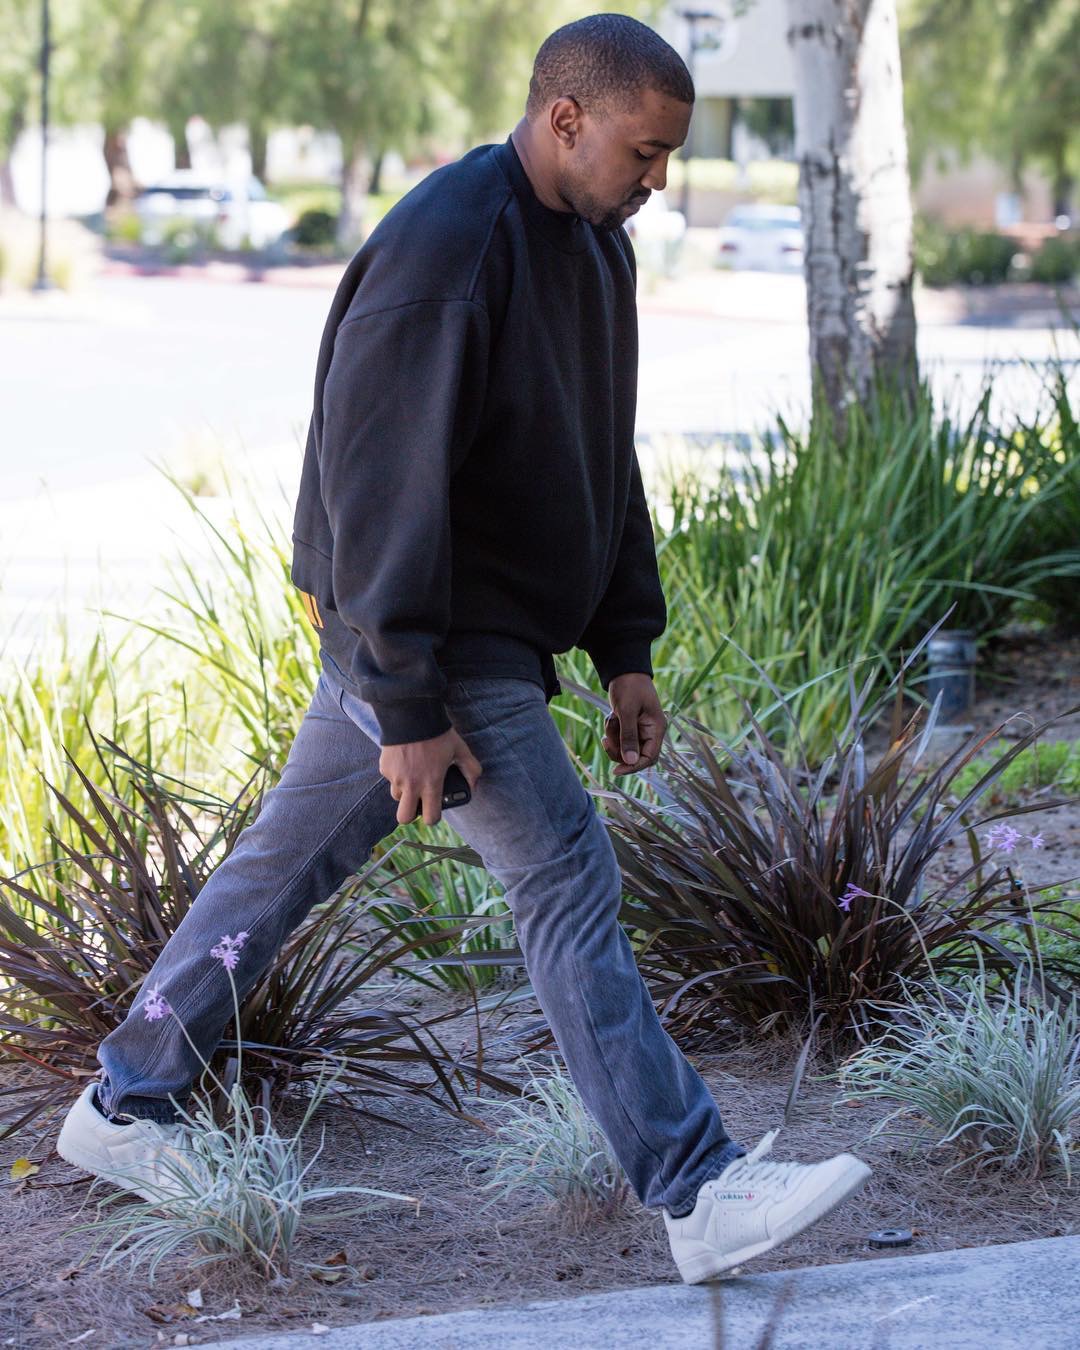 SPOTTED: Kanye West Wears Adidas Yeezy Calabasas Powerphase Sneakers